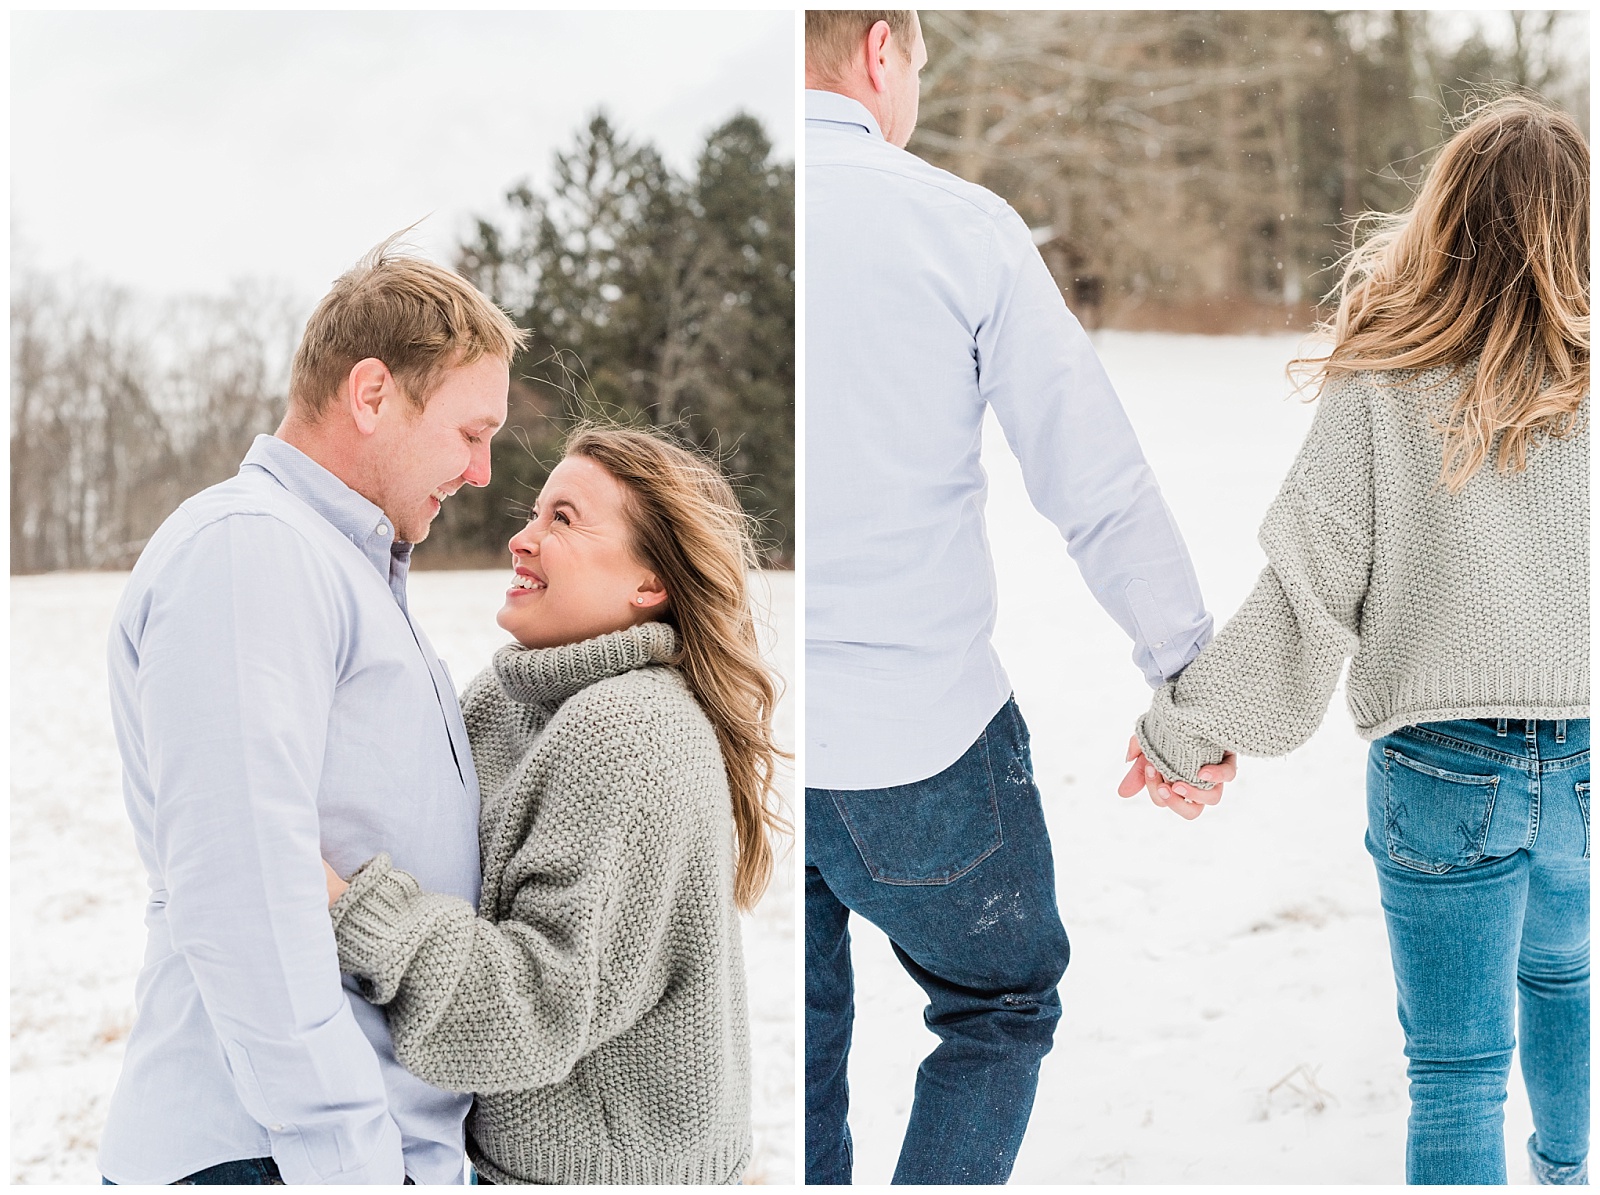 New Jersey Engagement Session, Snowy, Winter, Cozy, Session, Wedding Photographer, Cross Estate Gardens, Snow, Wintry, Light and Airy, Love